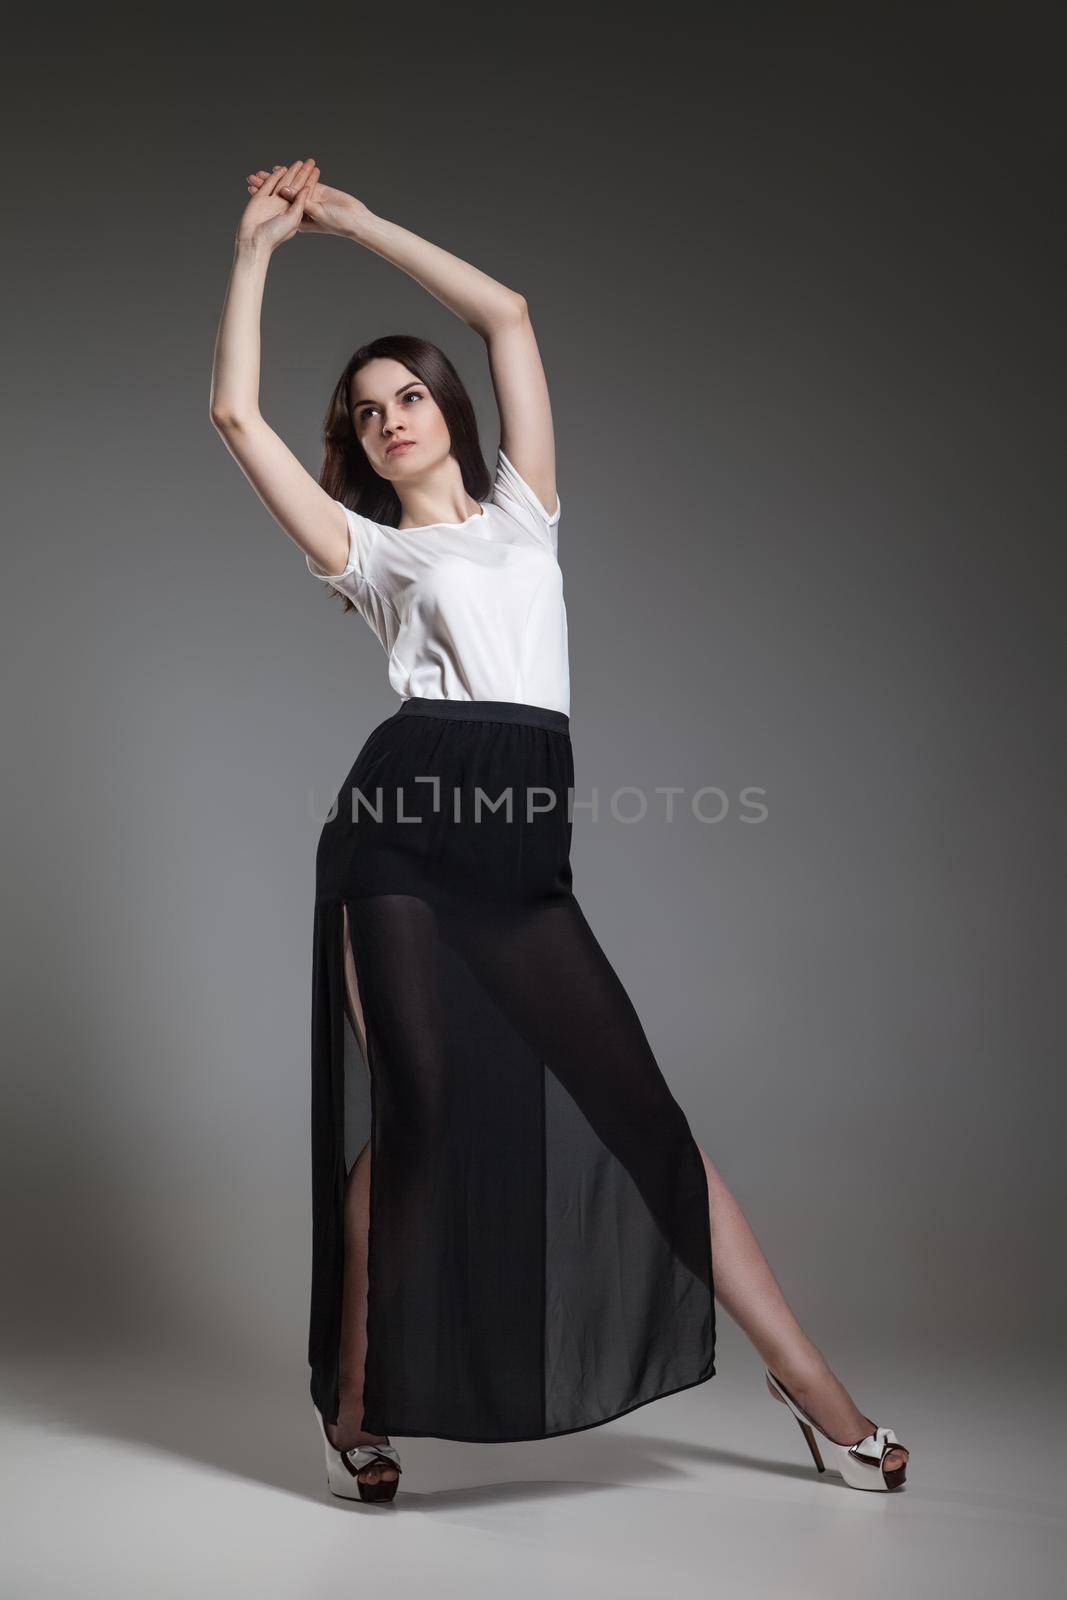 Beautiful model in white top and black skirt posing on grey background by Julenochek